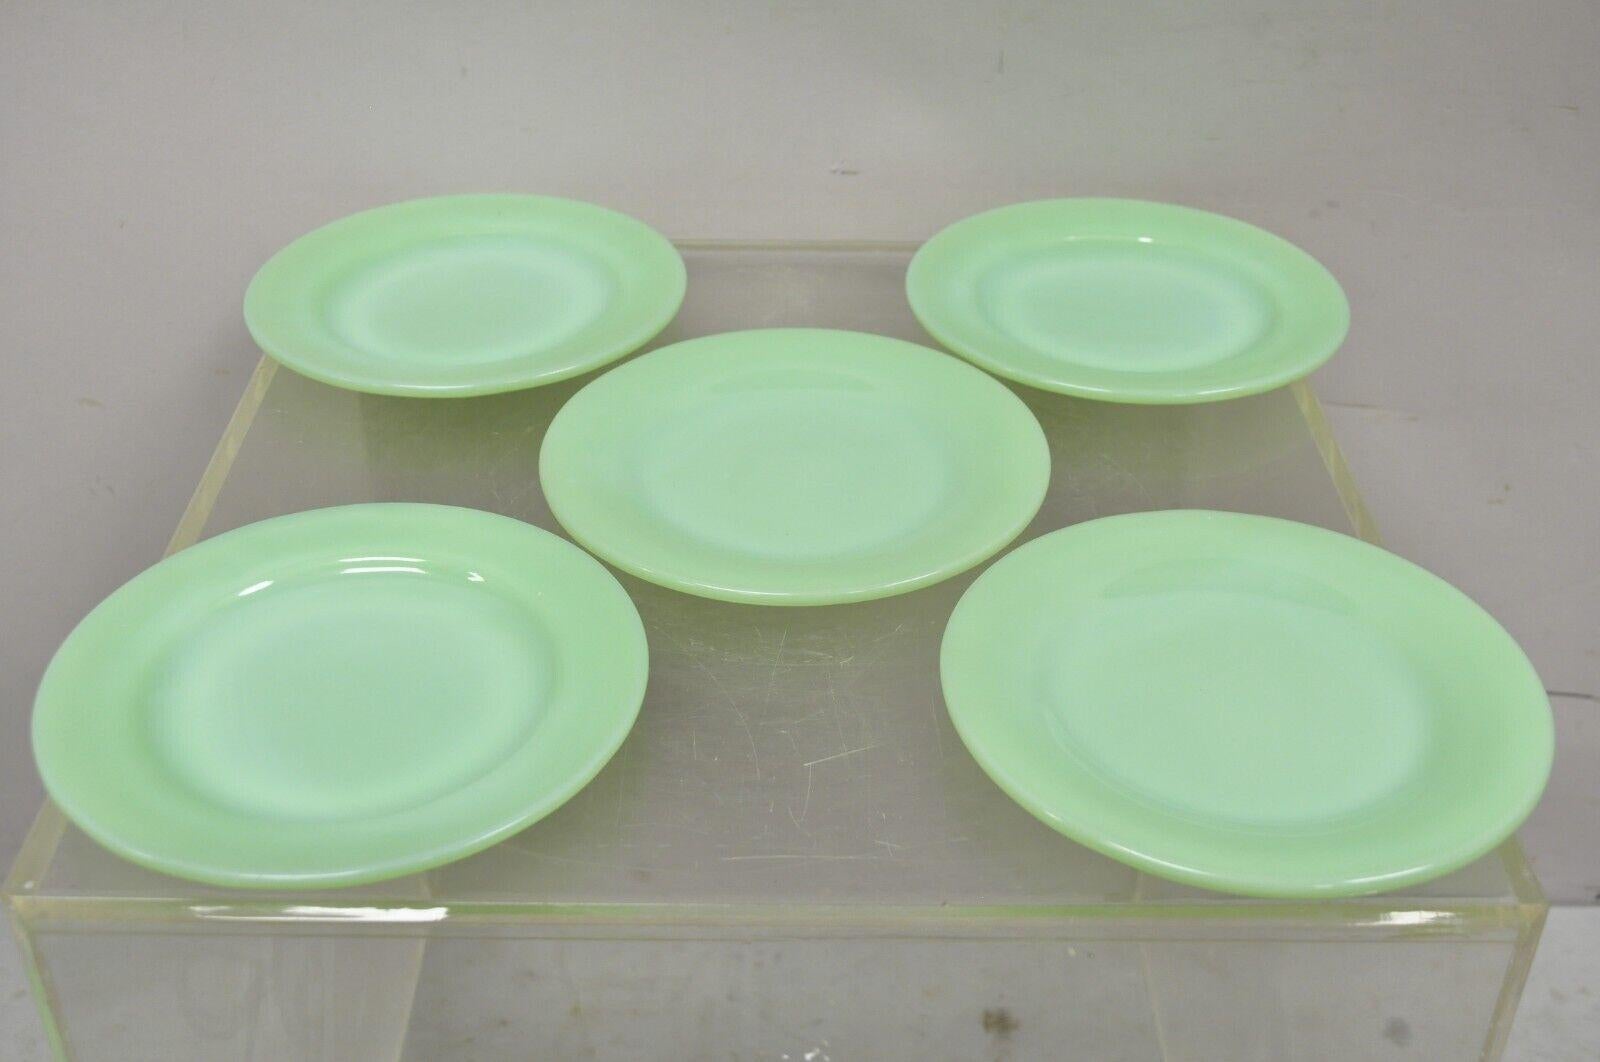 20th Century Vintage Fire King Jadeite Green Oven Ware Appetizer Salad Plate 5 Pc Set